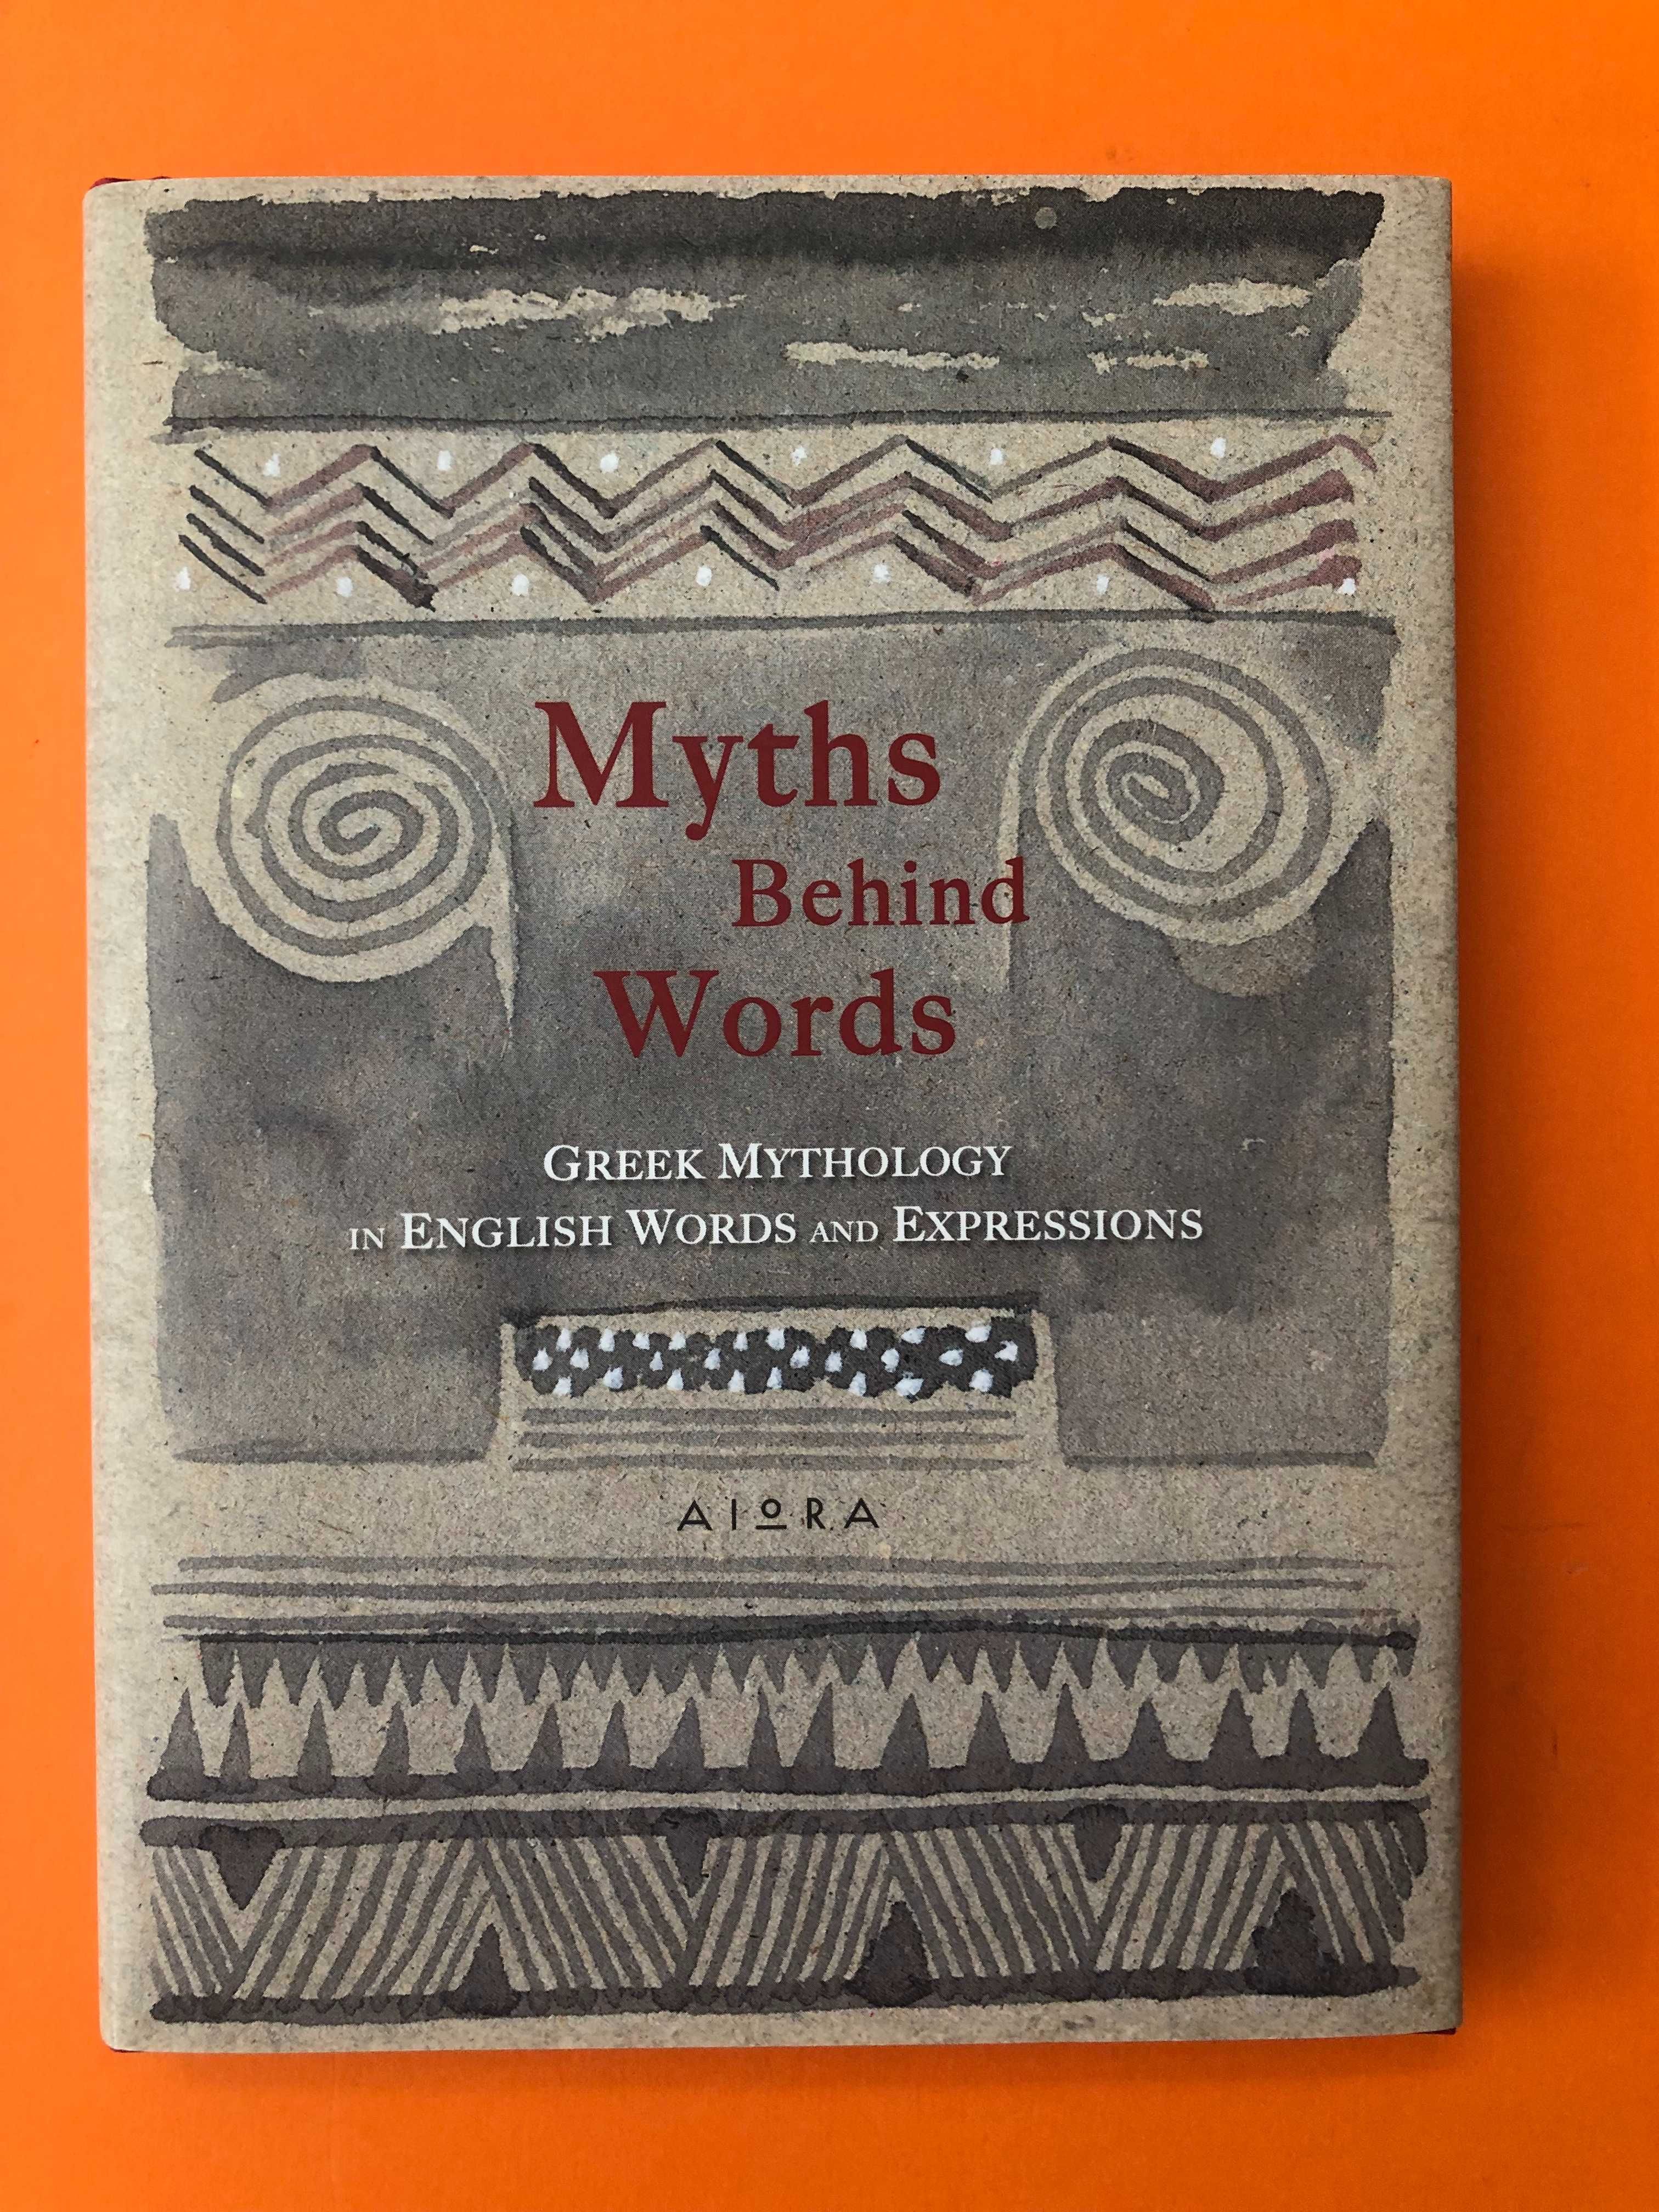 Myths behind words – Greek Mythology in English words and expressions